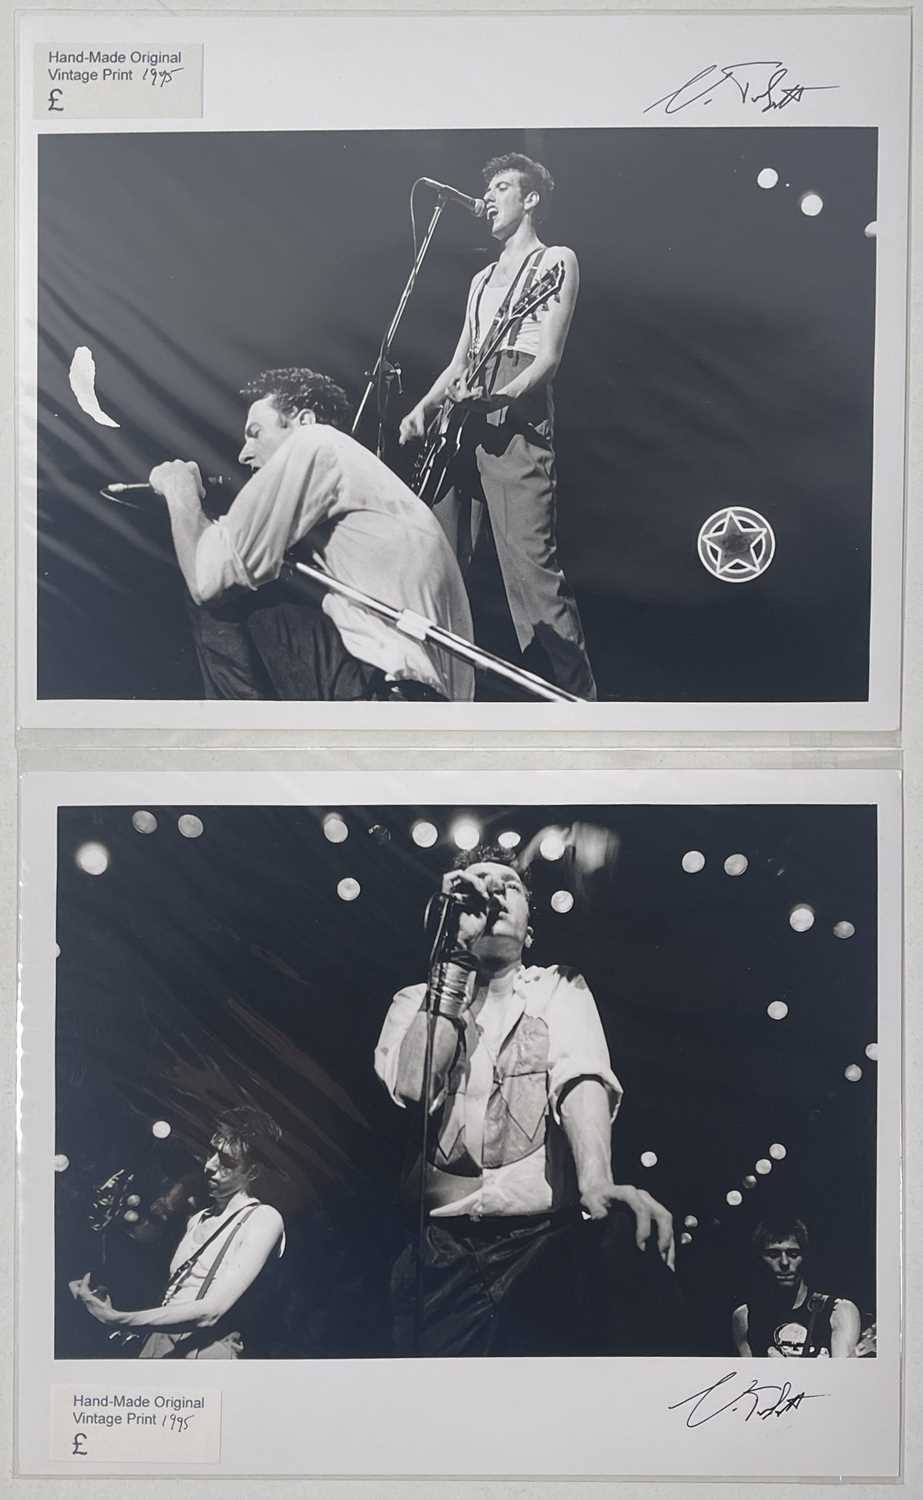 Lot 46 - THE CLASH - RAINBOW THEATRE 1979 - TWO SIGNED ORIGINAL PHOTOGRAPHS.